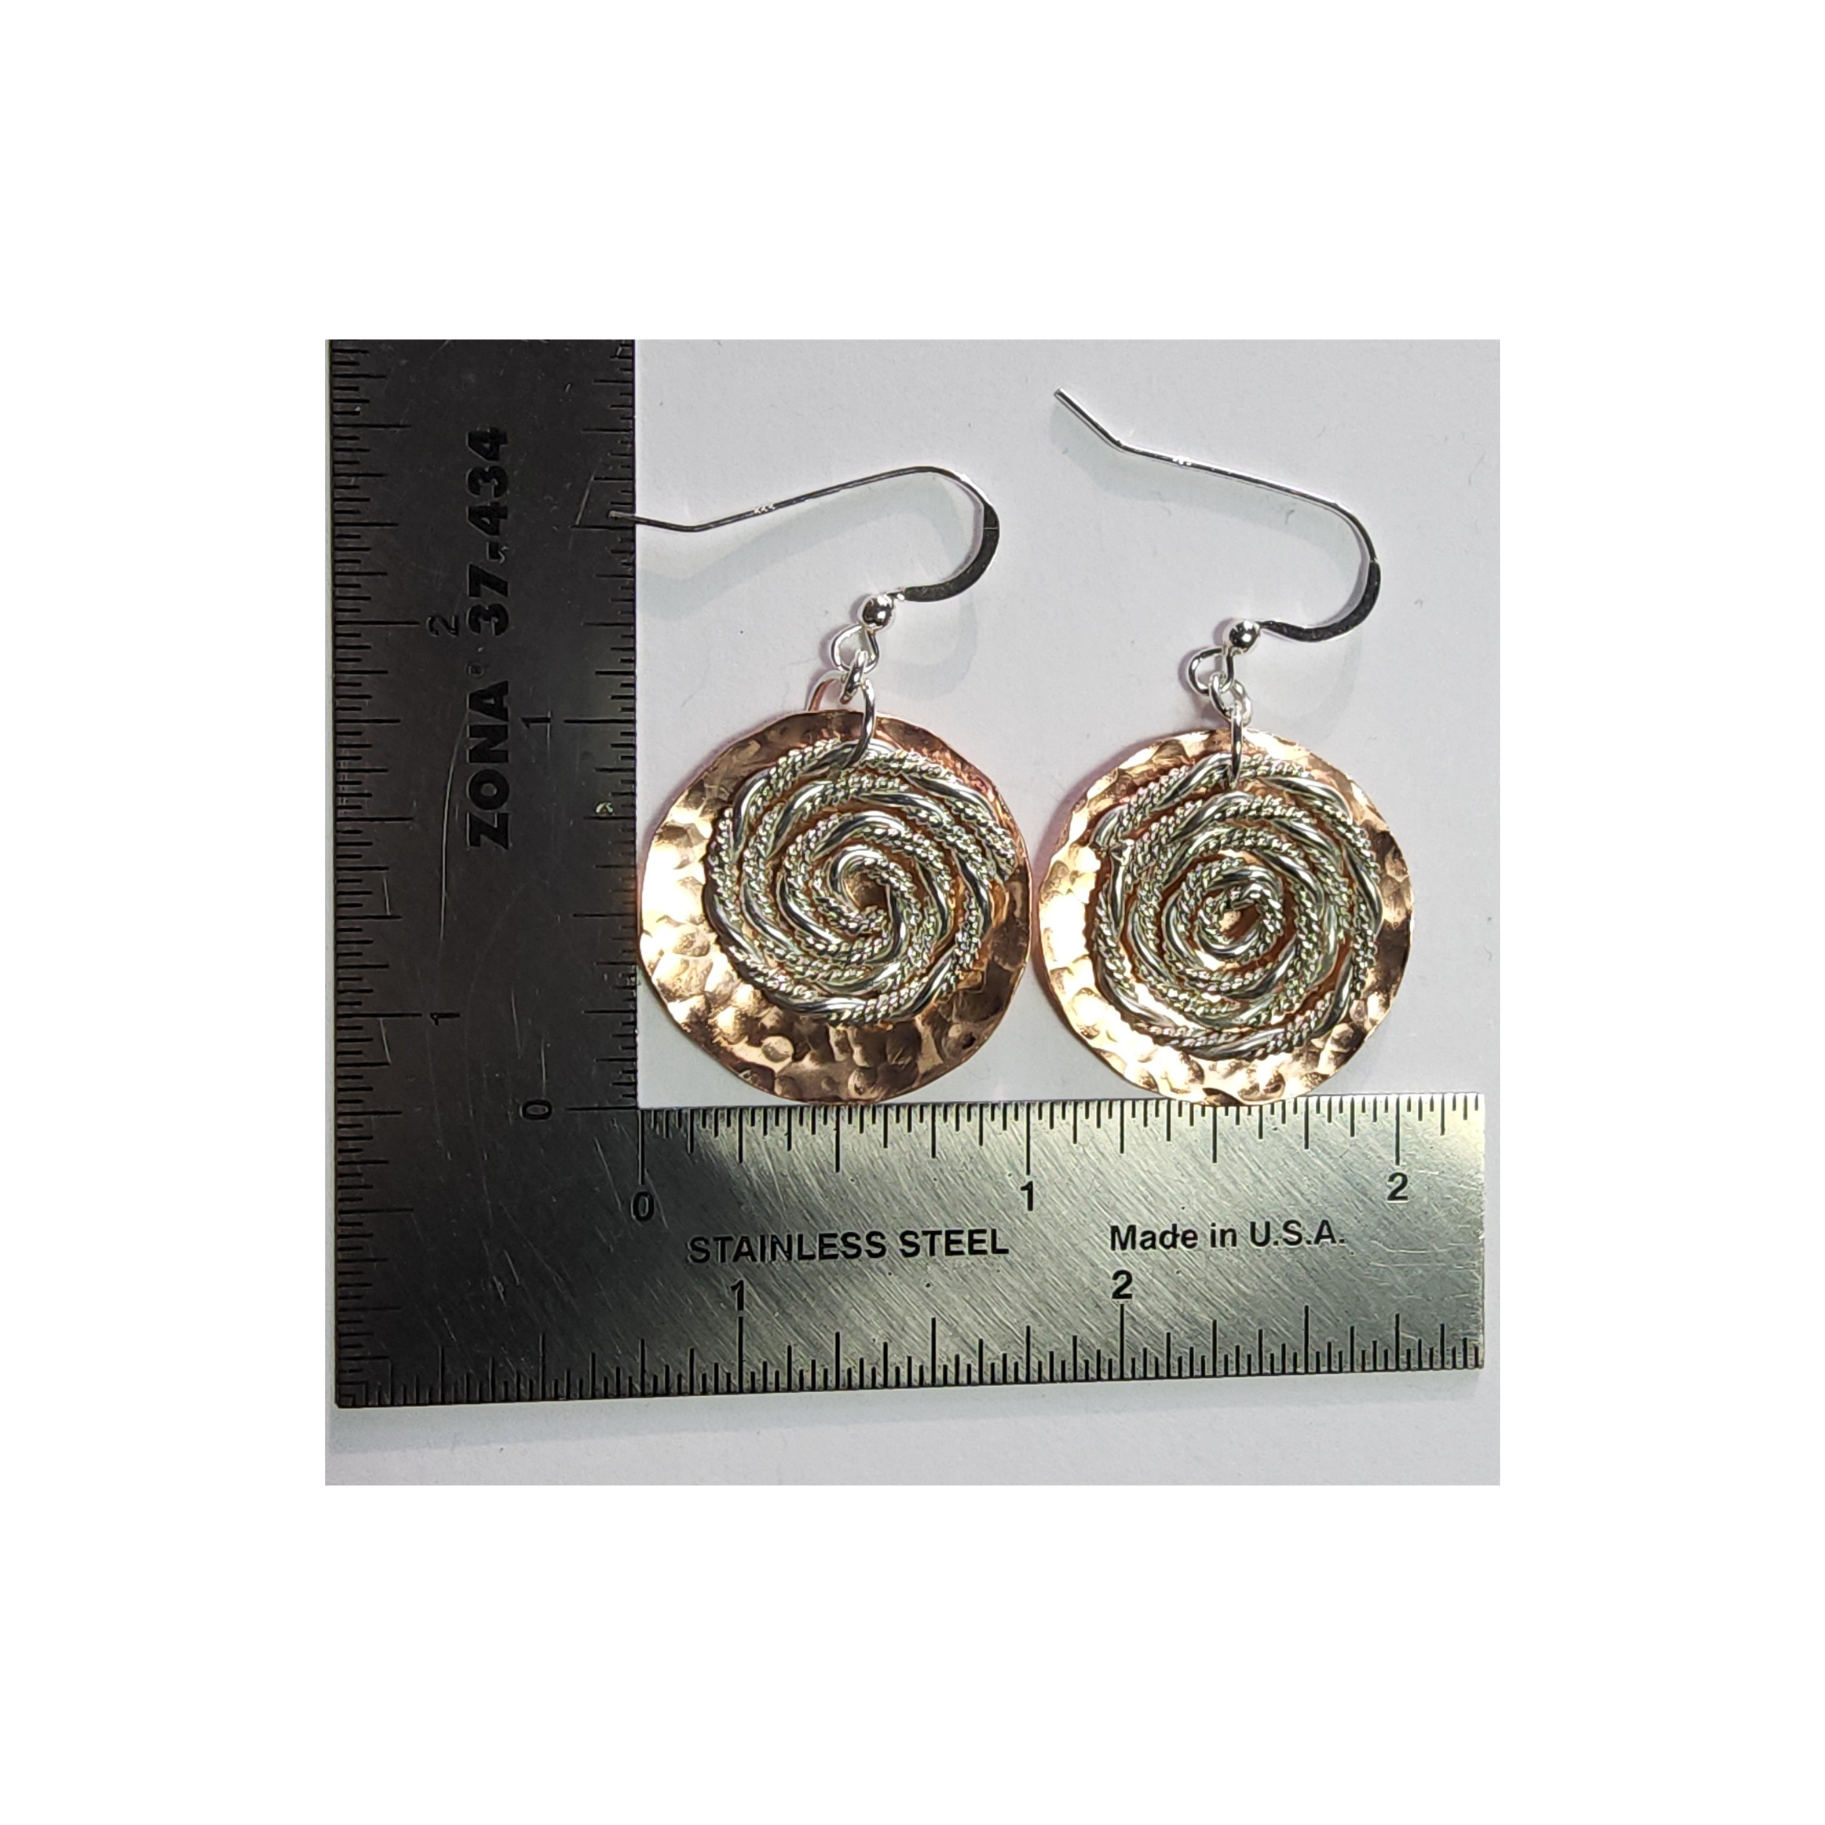 Womans Earrings Handmade Silver and Copper Jewelry